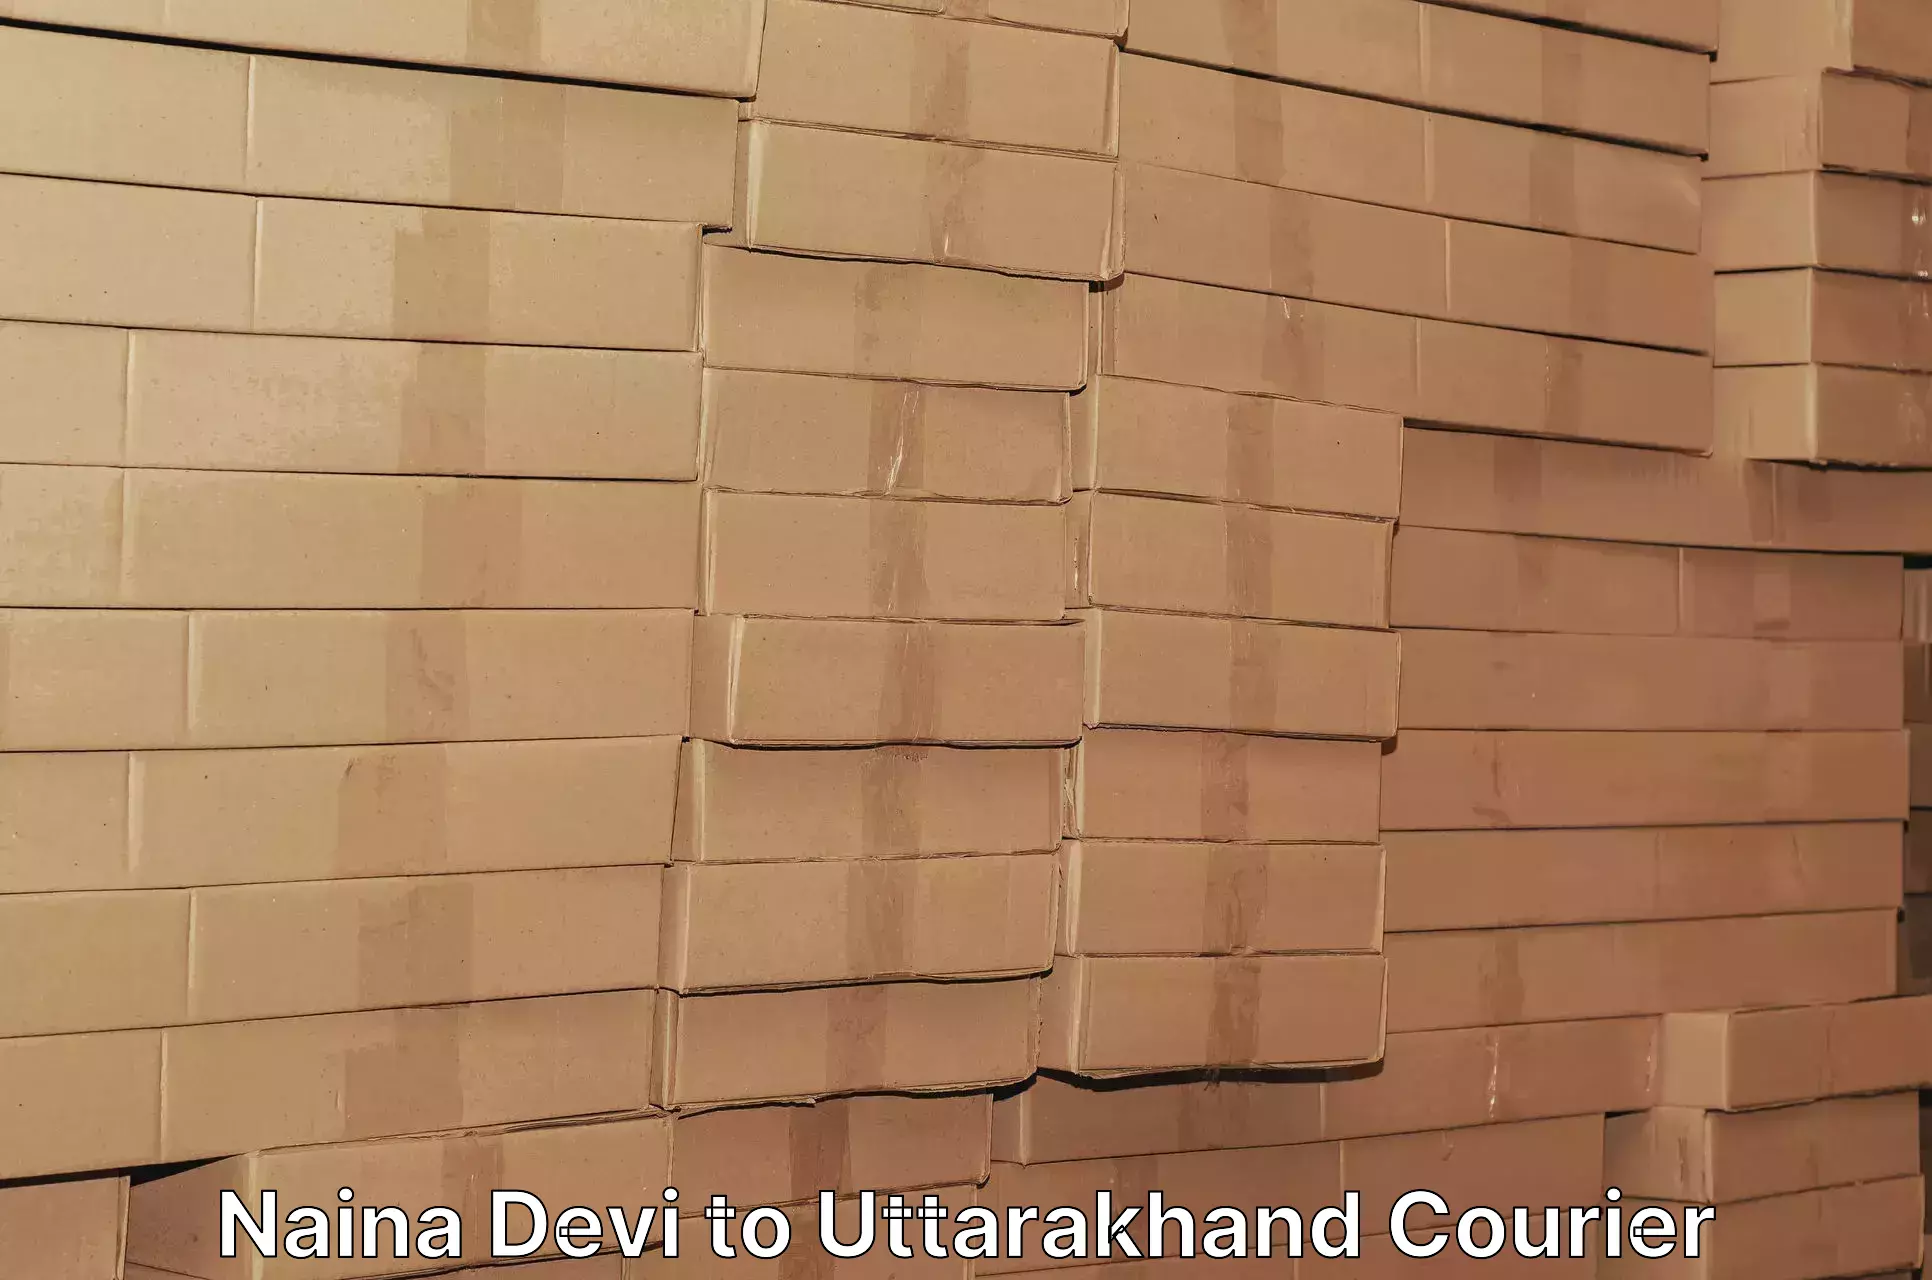 Flexible delivery scheduling Naina Devi to Uttarakhand